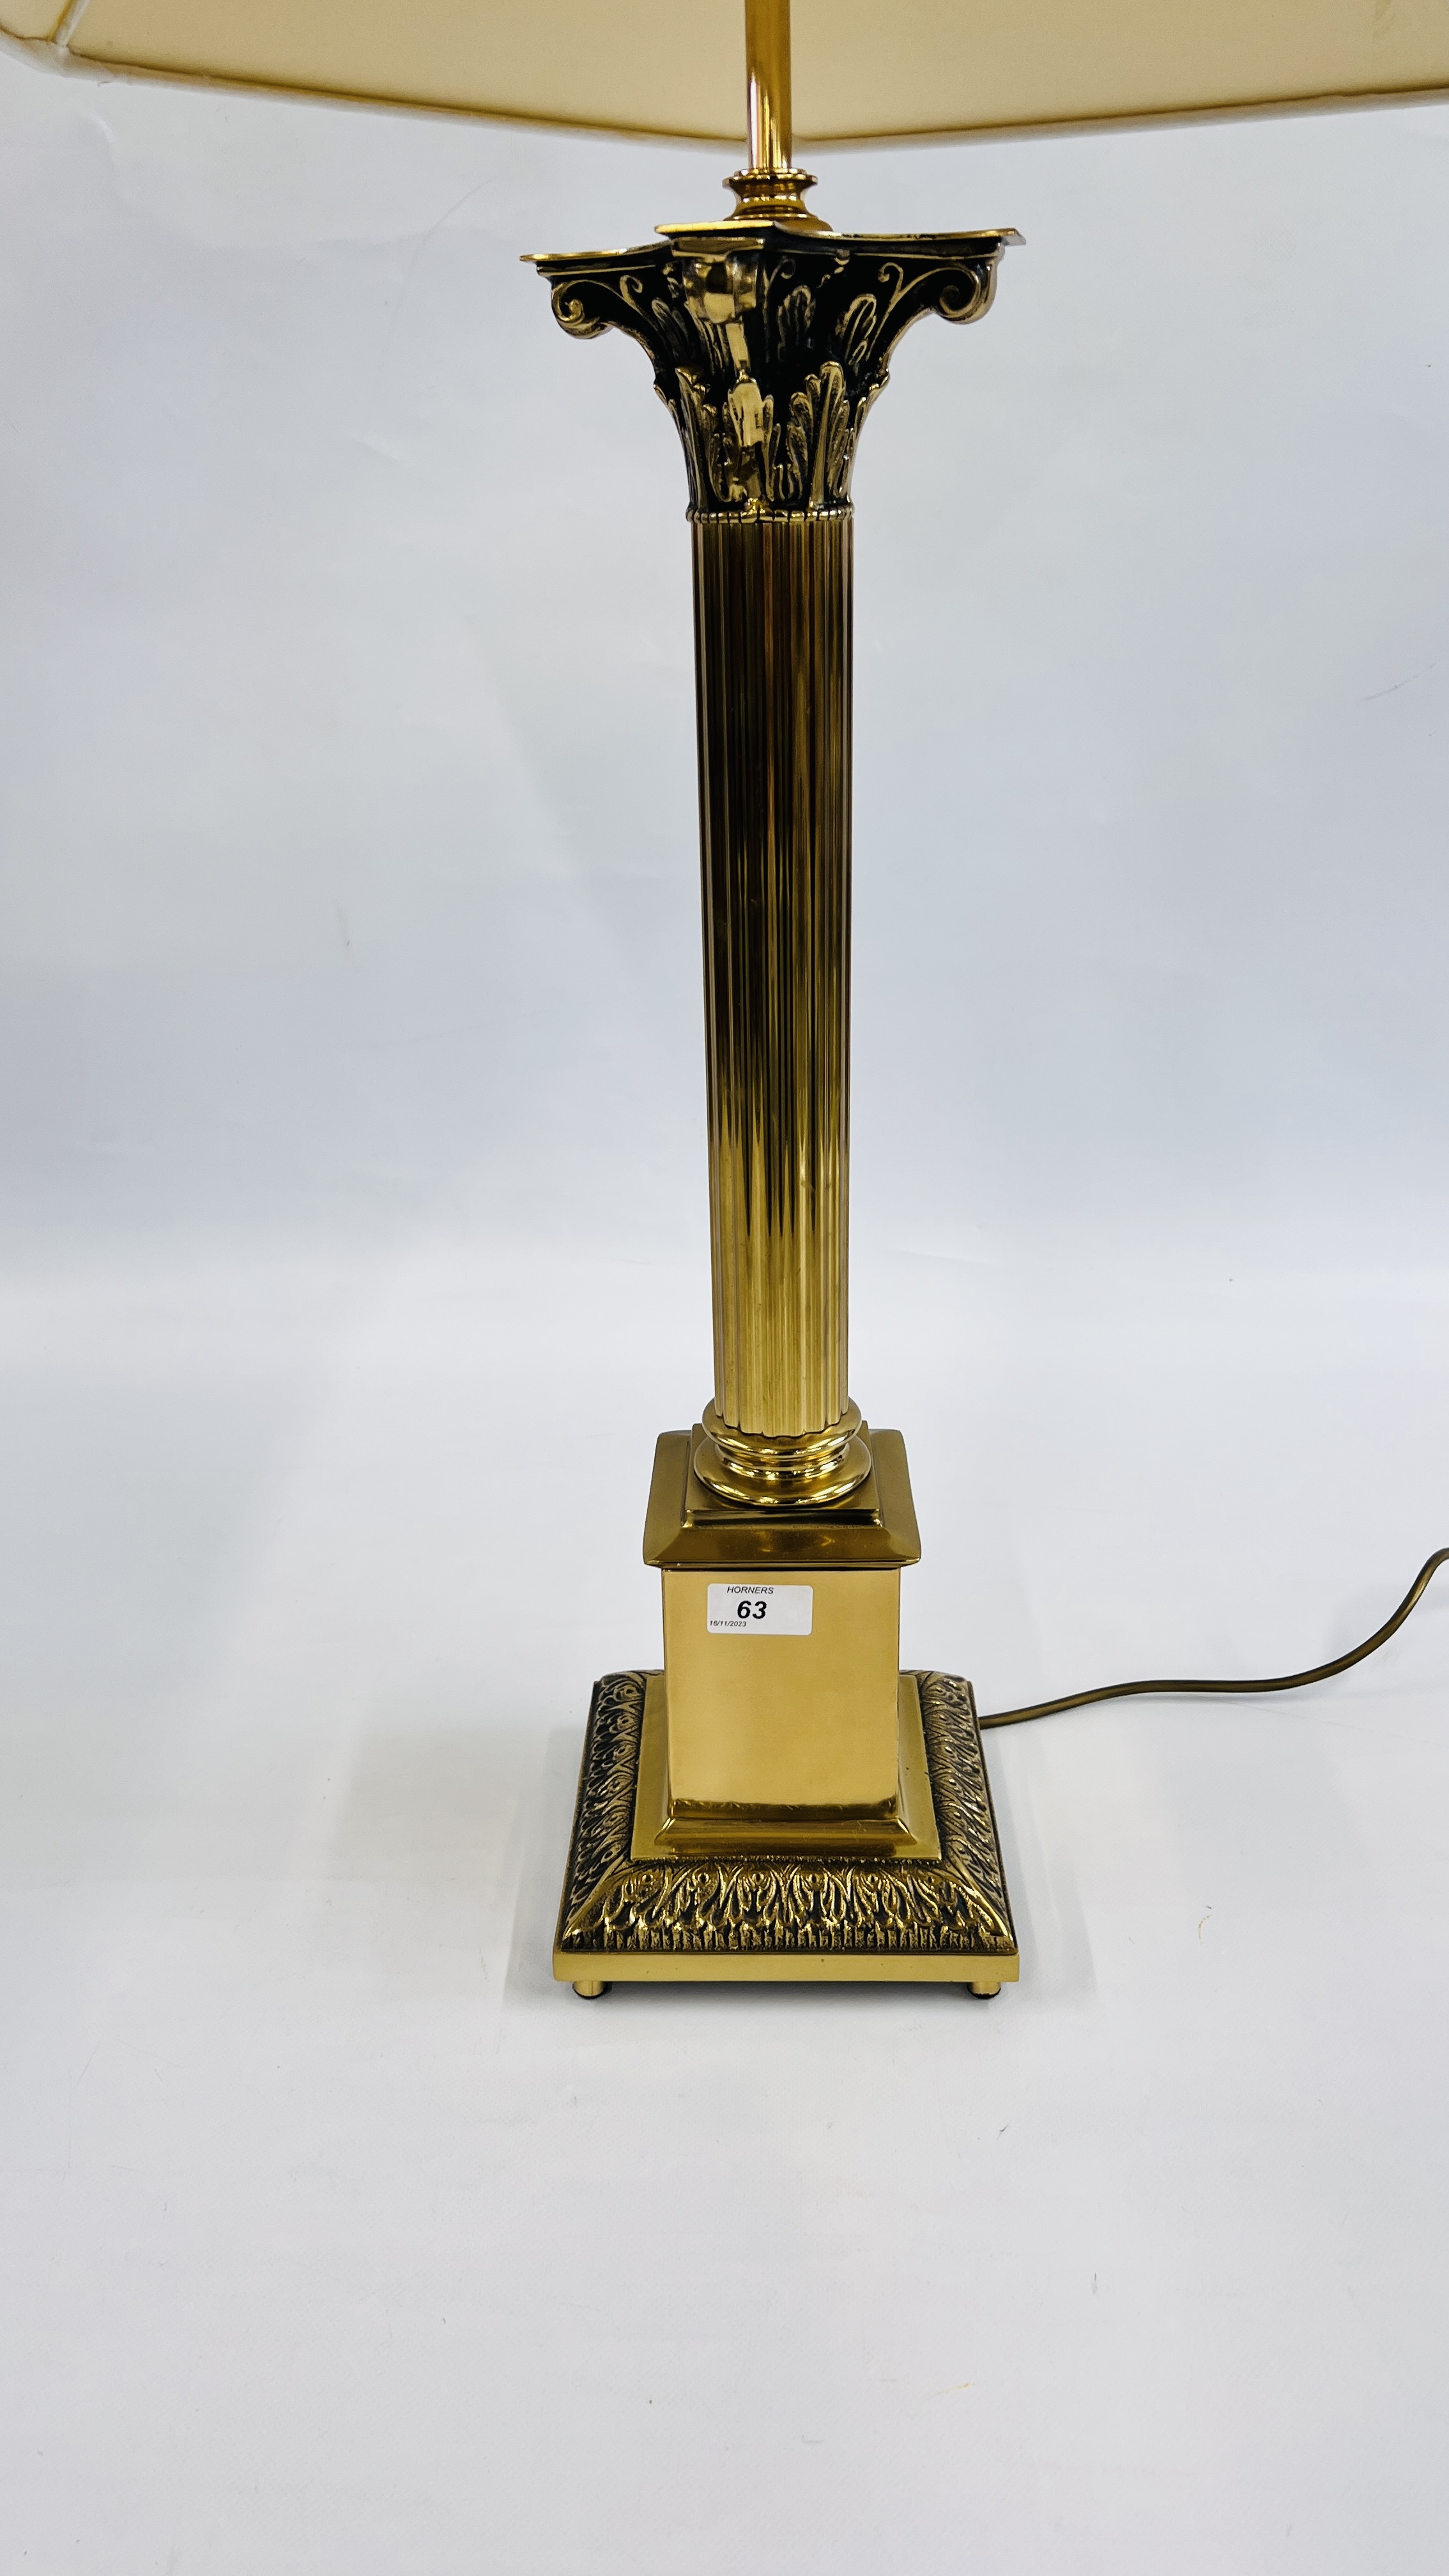 AN IMPRESSIVE HEAVY BRASS CORINTHIAN COLUMN DESIGN TABLE LAMP WITH CREAM PATTERNED SHADE - HEIGHT - Image 2 of 4